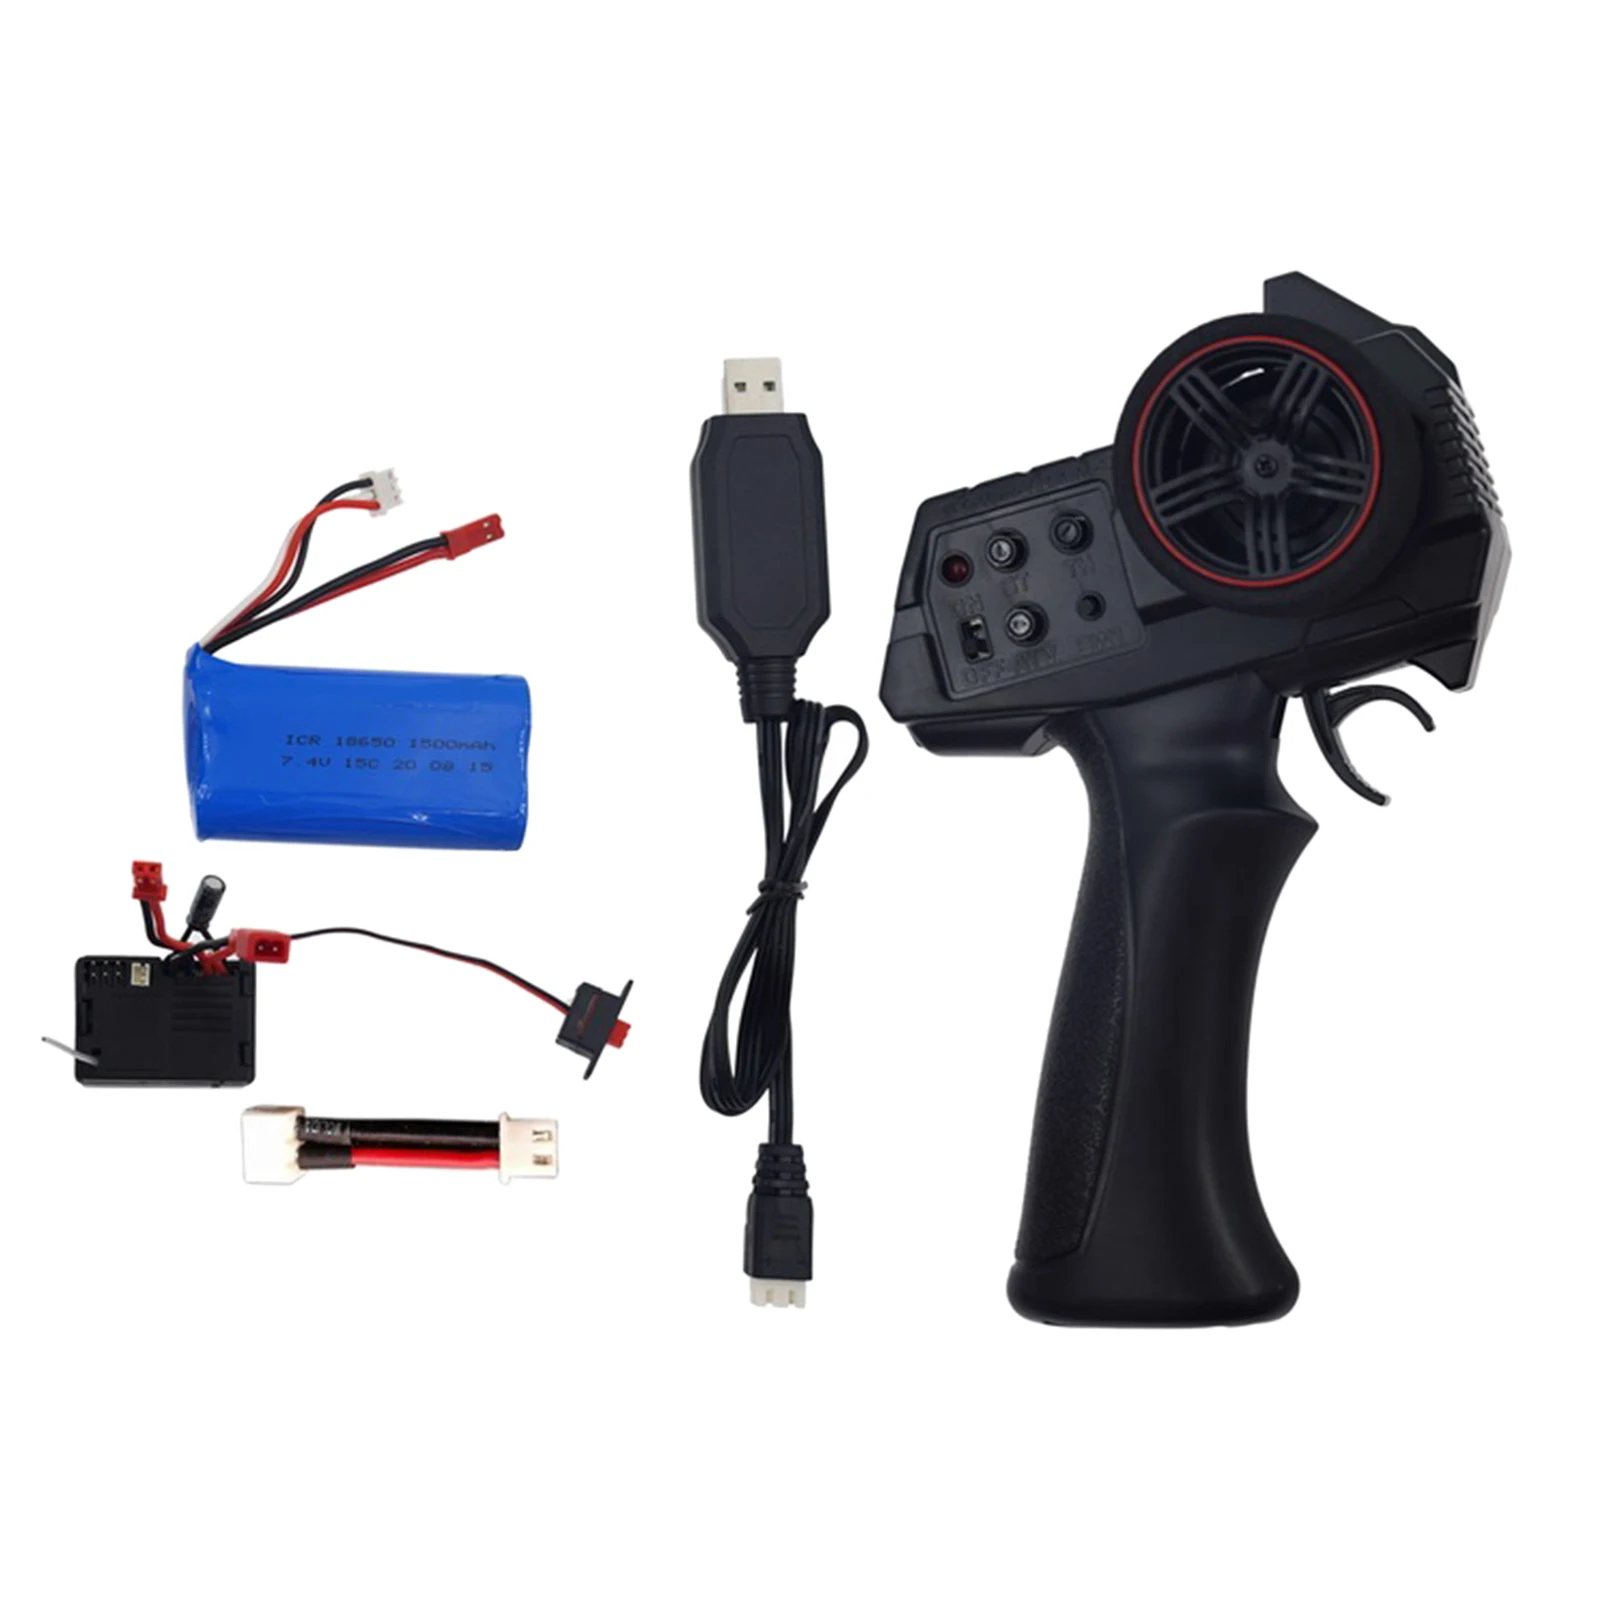 2.4G 3CH RC transmitter Car Controller with Receiver for MN90 MN90K MN91 MN91K MN45 MN45K MN99 MN96 MN99S WPL C14 C14K C24 C24K